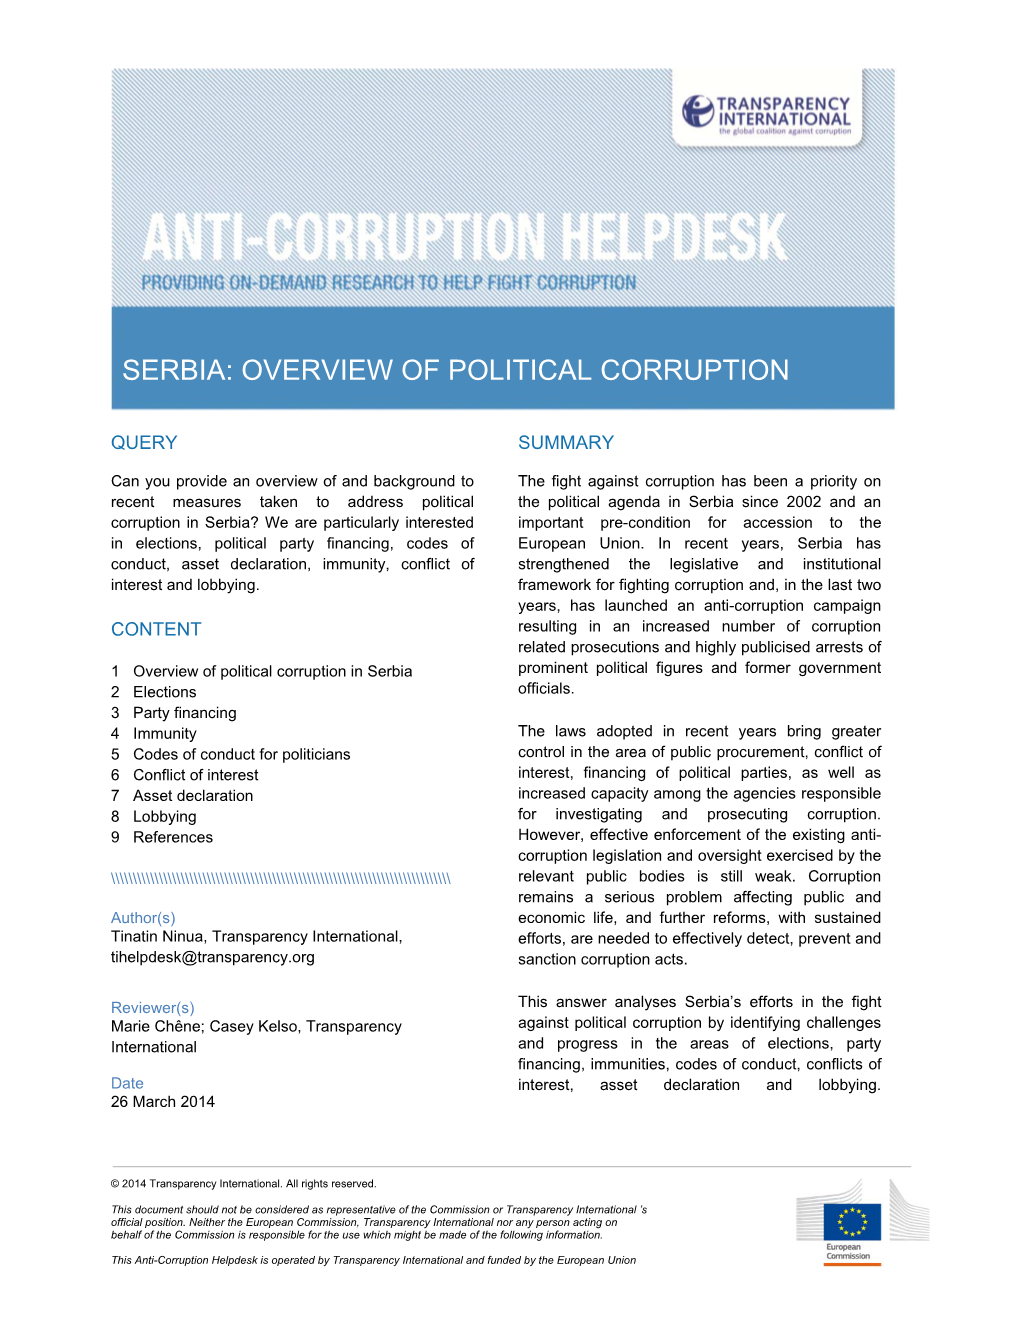 Serbia: Overview of Political Corruption